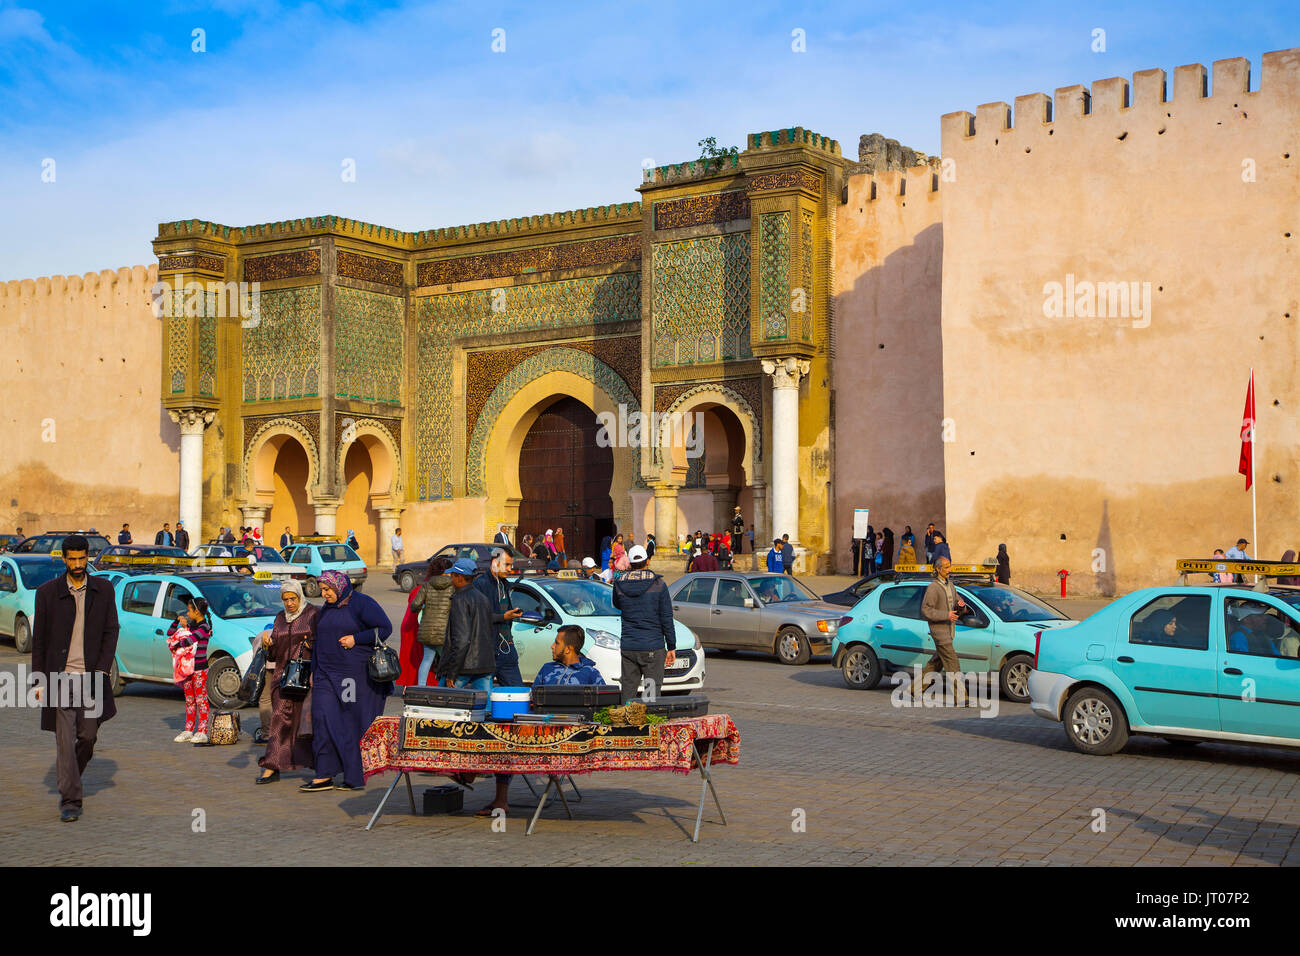 Street life scene. La Bab Mansour or Bab Masour el-Aleuj door, Lahdim Square. Old Imperial City Gate built in 1732 by Moulay Abdallah, Meknes. Morocco Stock Photo